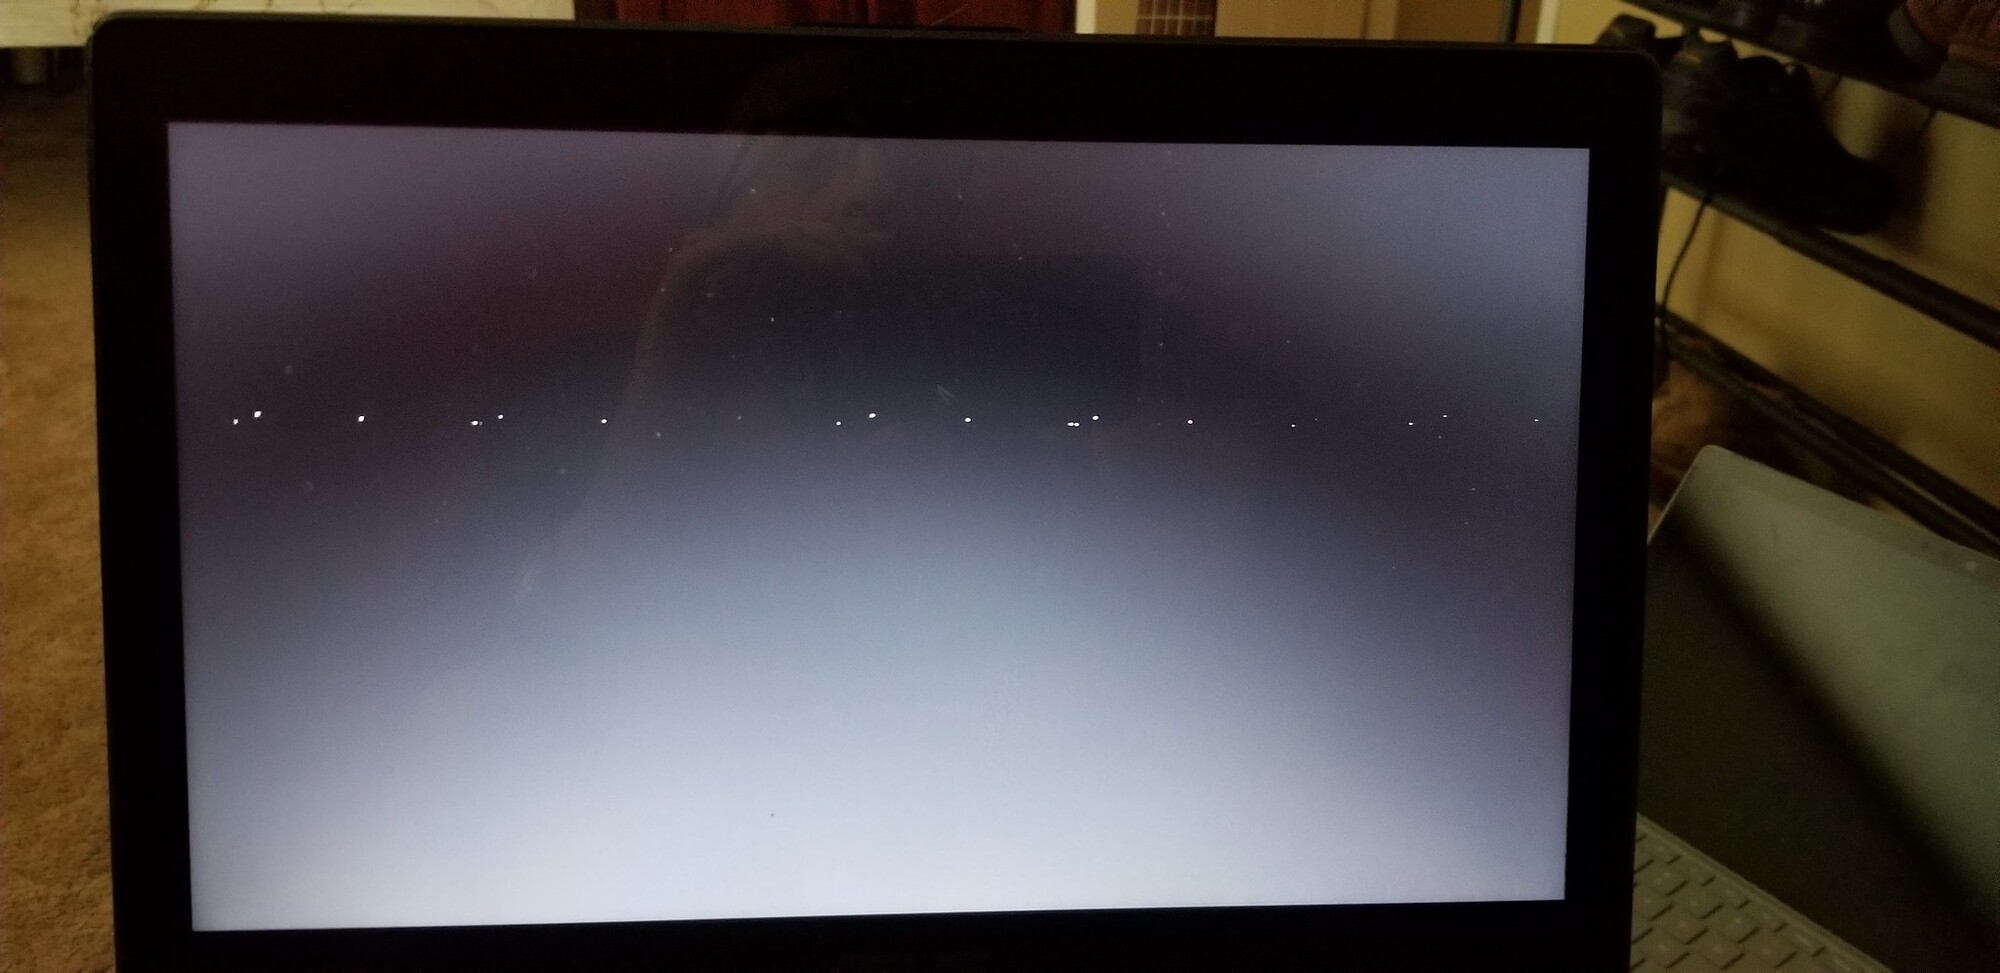 Trying to recover Windows from USB, flashing dots across middle of screen 8842f51b-b542-4fca-82d4-e2b3b219ec20?upload=true.jpg